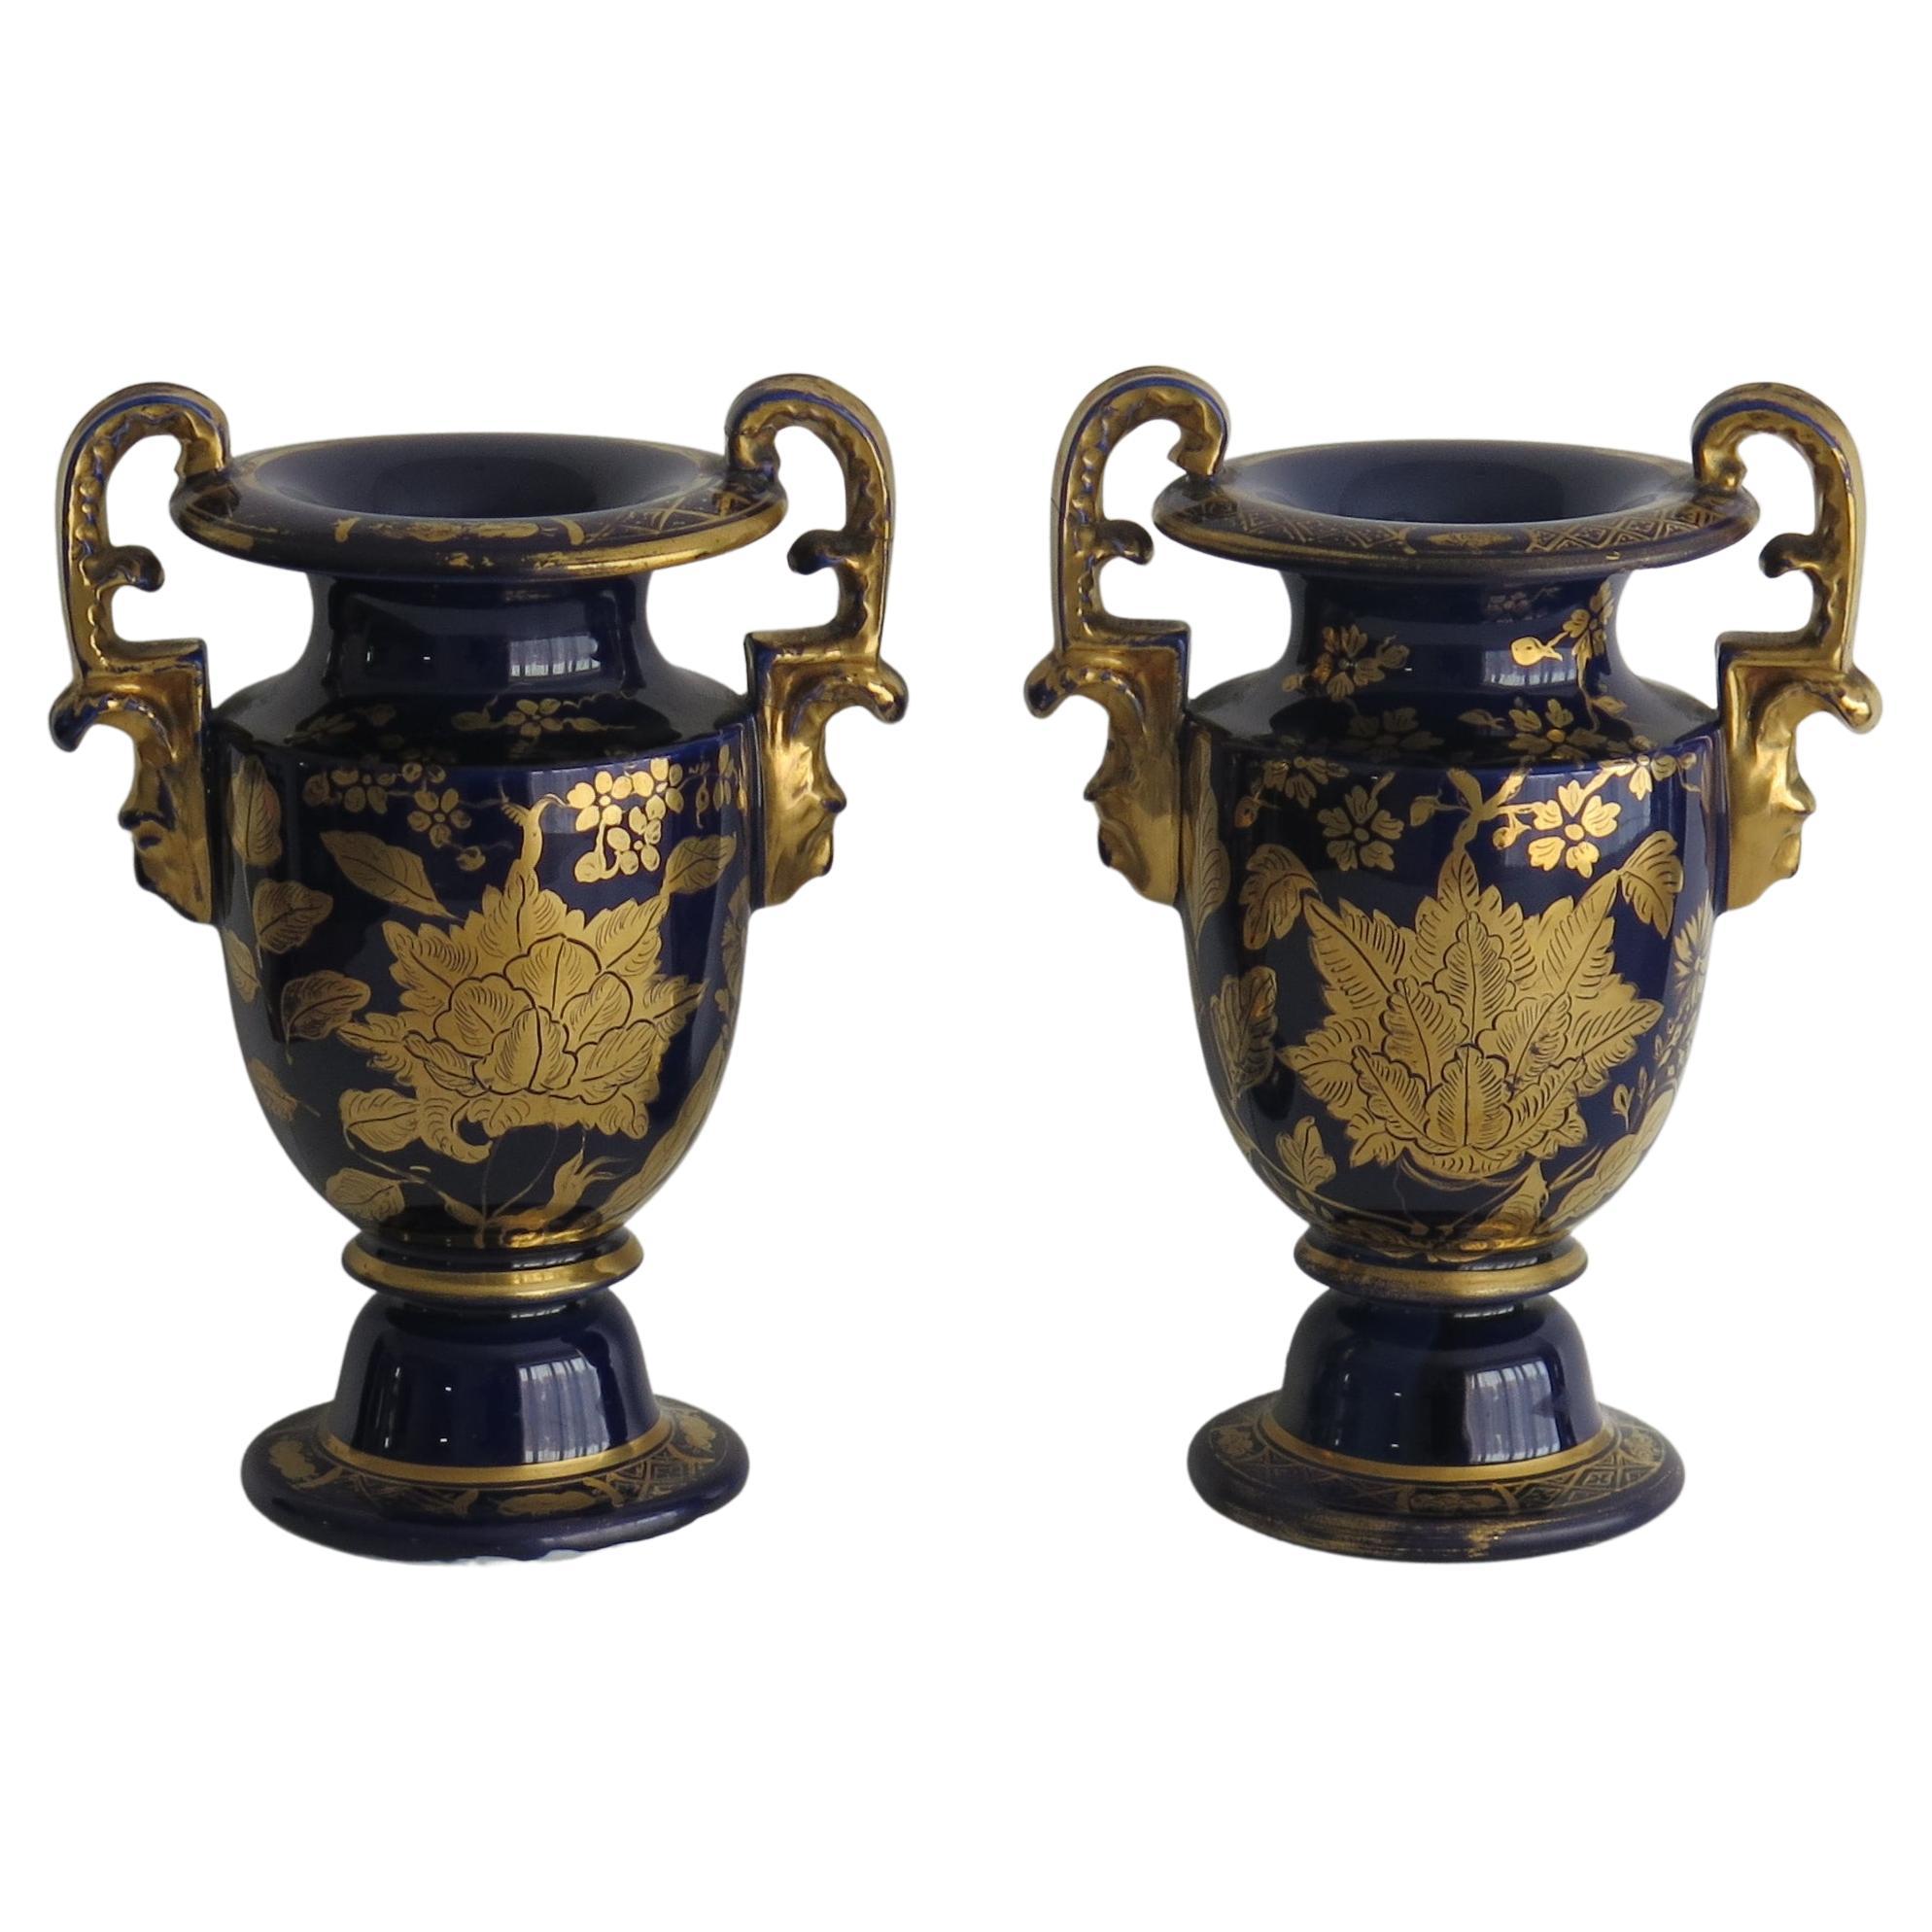 Georgian Pair of Mason's Ironstone Vases with Gold Gilded Pattern, circa 1818